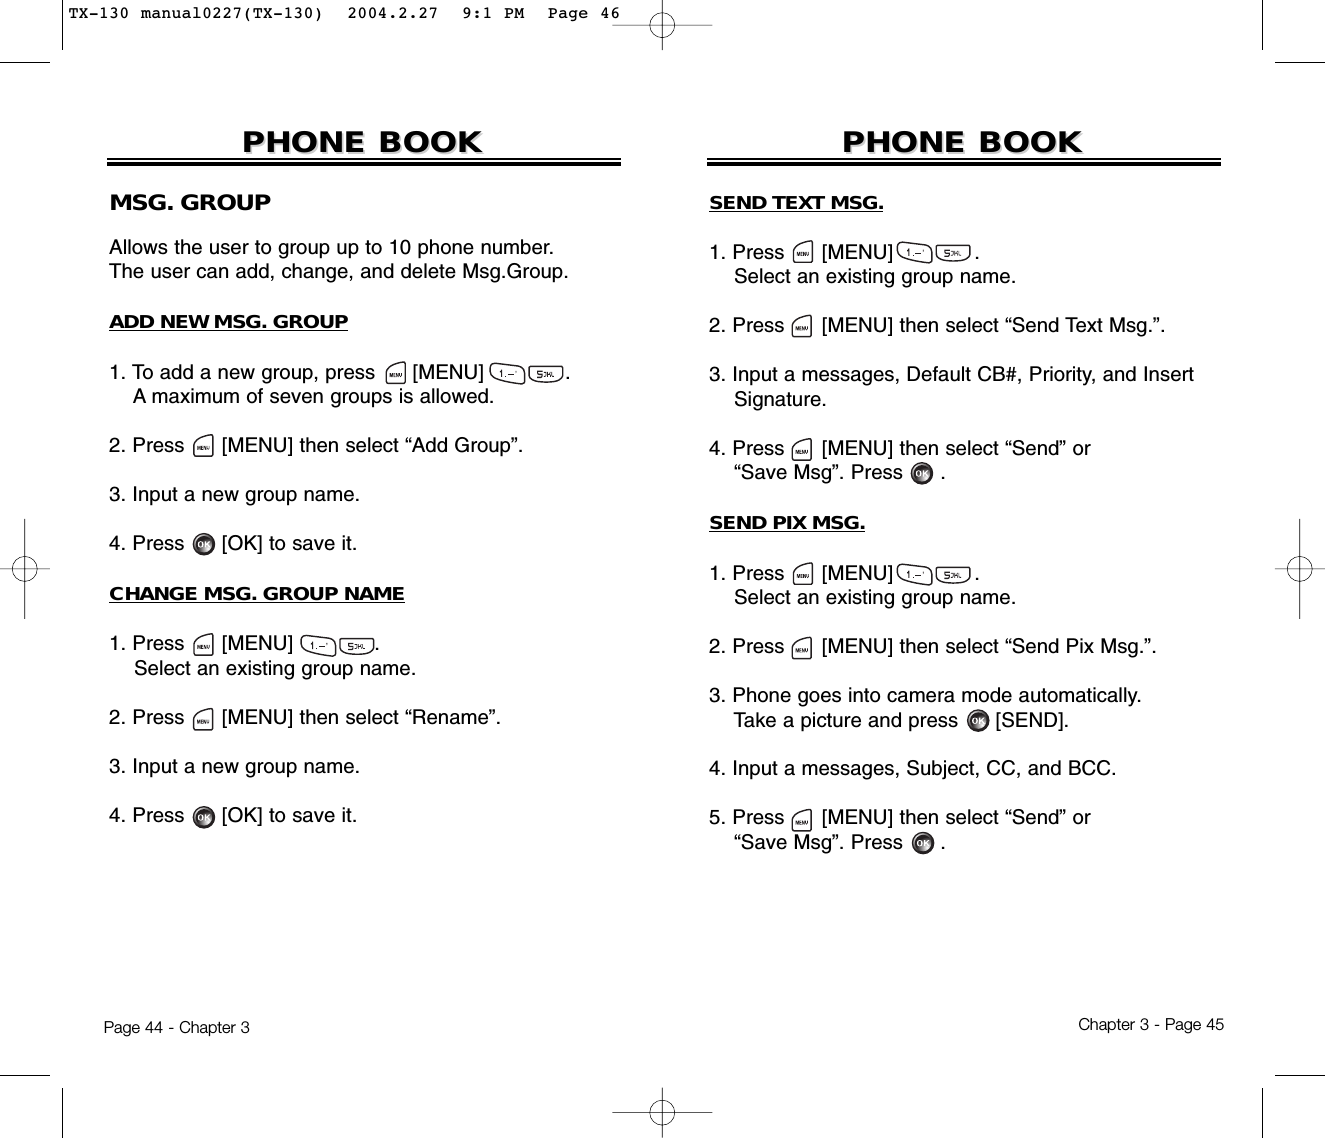 Chapter 3 - Page 45Page 44 - Chapter 3PHONE BOOKPHONE BOOKMSG. GROUPAllows the user to group up to 10 phone number. The user can add, change, and delete Msg.Group.ADD NEW MSG. GROUP1. To add a new group, press      [MENU]             .A maximum of seven groups is allowed.2. Press [MENU] then select “Add Group”.3. Input a new group name.4. Press [OK] to save it.CHANGE MSG. GROUP NAME1. Press      [MENU]             .Select an existing group name.2. Press [MENU] then select “Rename”.3. Input a new group name.4. Press [OK] to save it.PHONE BOOKPHONE BOOKSEND TEXT MSG.1. Press      [MENU]             .Select an existing group name.2. Press [MENU] then select “Send Text Msg.”.3. Input a messages, Default CB#, Priority, and Insert   Signature.4. Press [MENU] then select “Send” or “Save Msg”. Press .SEND PIX MSG.1. Press      [MENU]             .Select an existing group name.2. Press [MENU] then select “Send Pix Msg.”.3. Phone goes into camera mode automatically.Take a picture and press [SEND].4. Input a messages, Subject, CC, and BCC.5. Press [MENU] then select “Send” or “Save Msg”. Press .TX-130 manual0227(TX-130)  2004.2.27  9:1 PM  Page 46